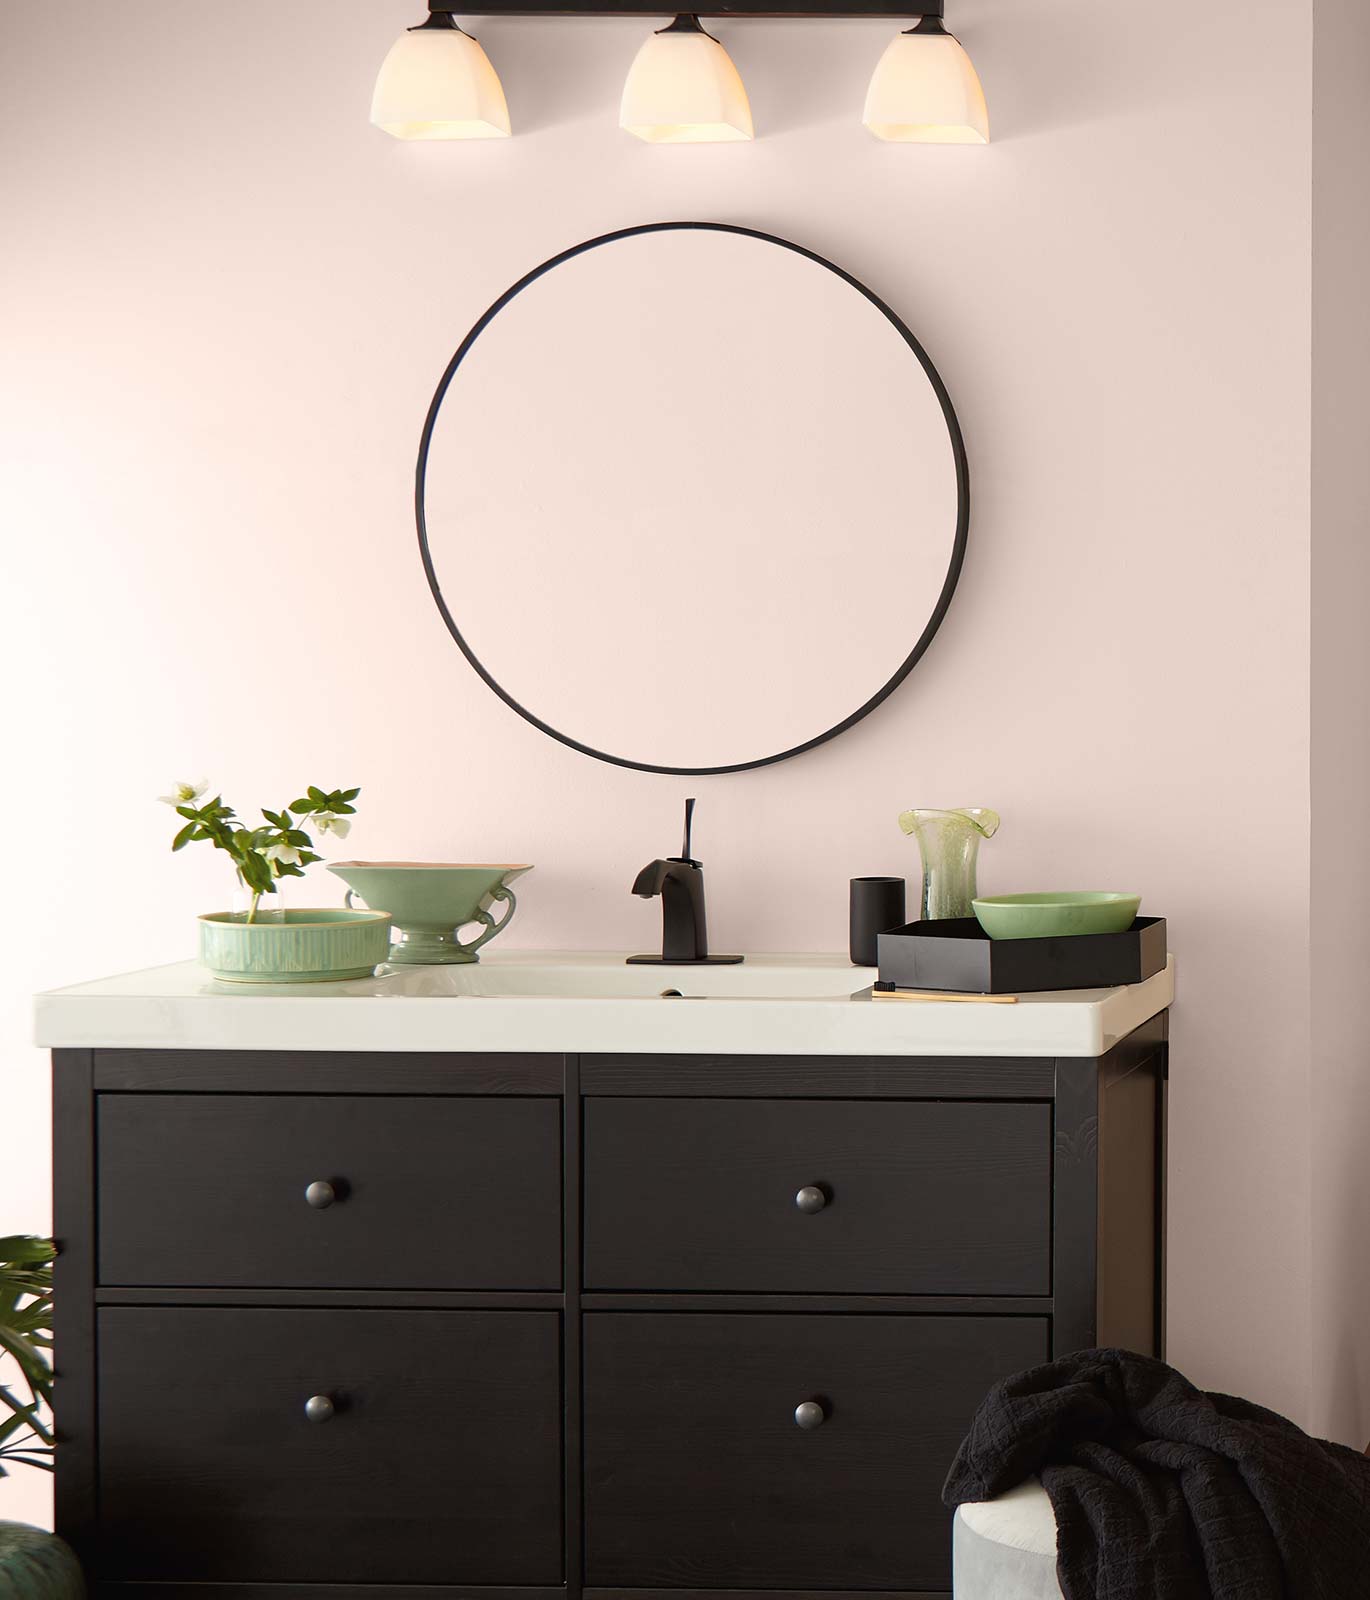 A bathroom with a white sink, brown cabinet and large round mirror. Walls are painted in a subtle pink color and room is decorated with green ceramic décor elements.